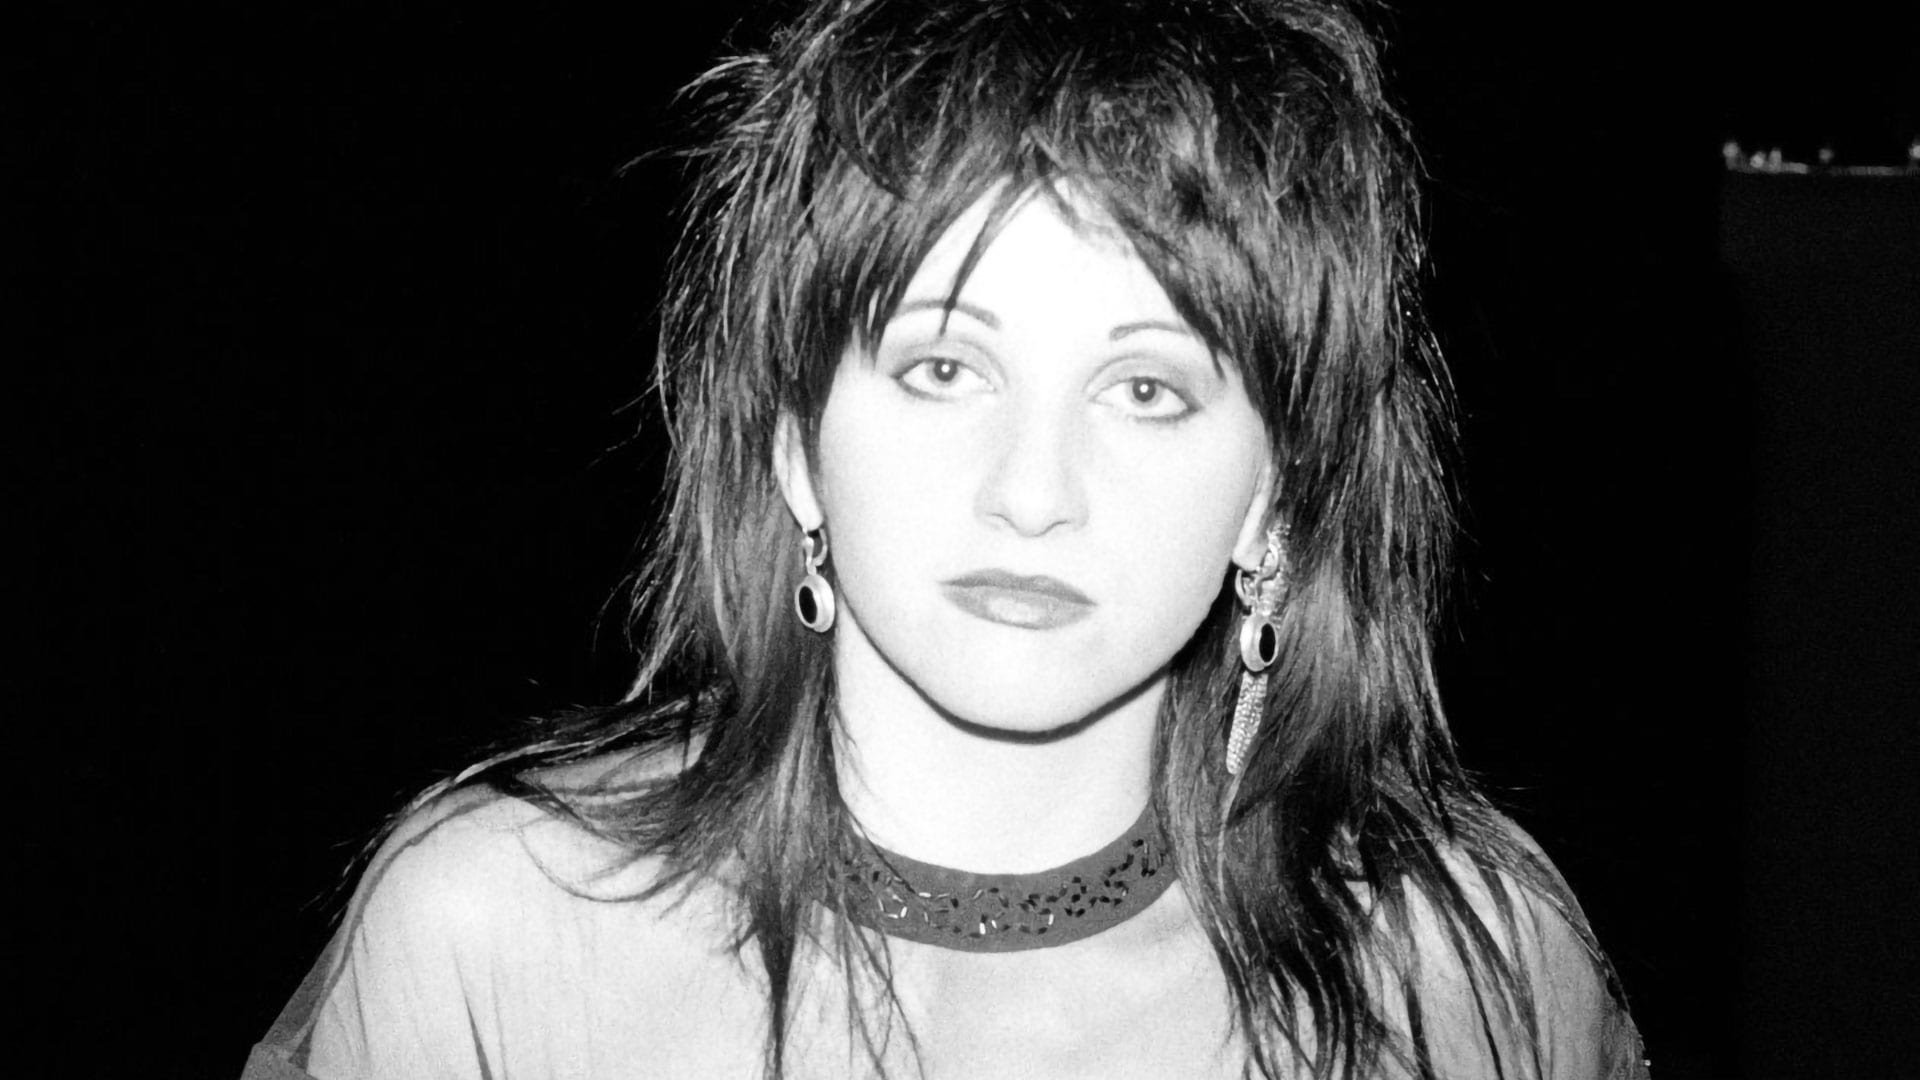 32 Years Ago: LYDIA LUNCH live at the Detroit Institute of Arts (Oral Fixation)